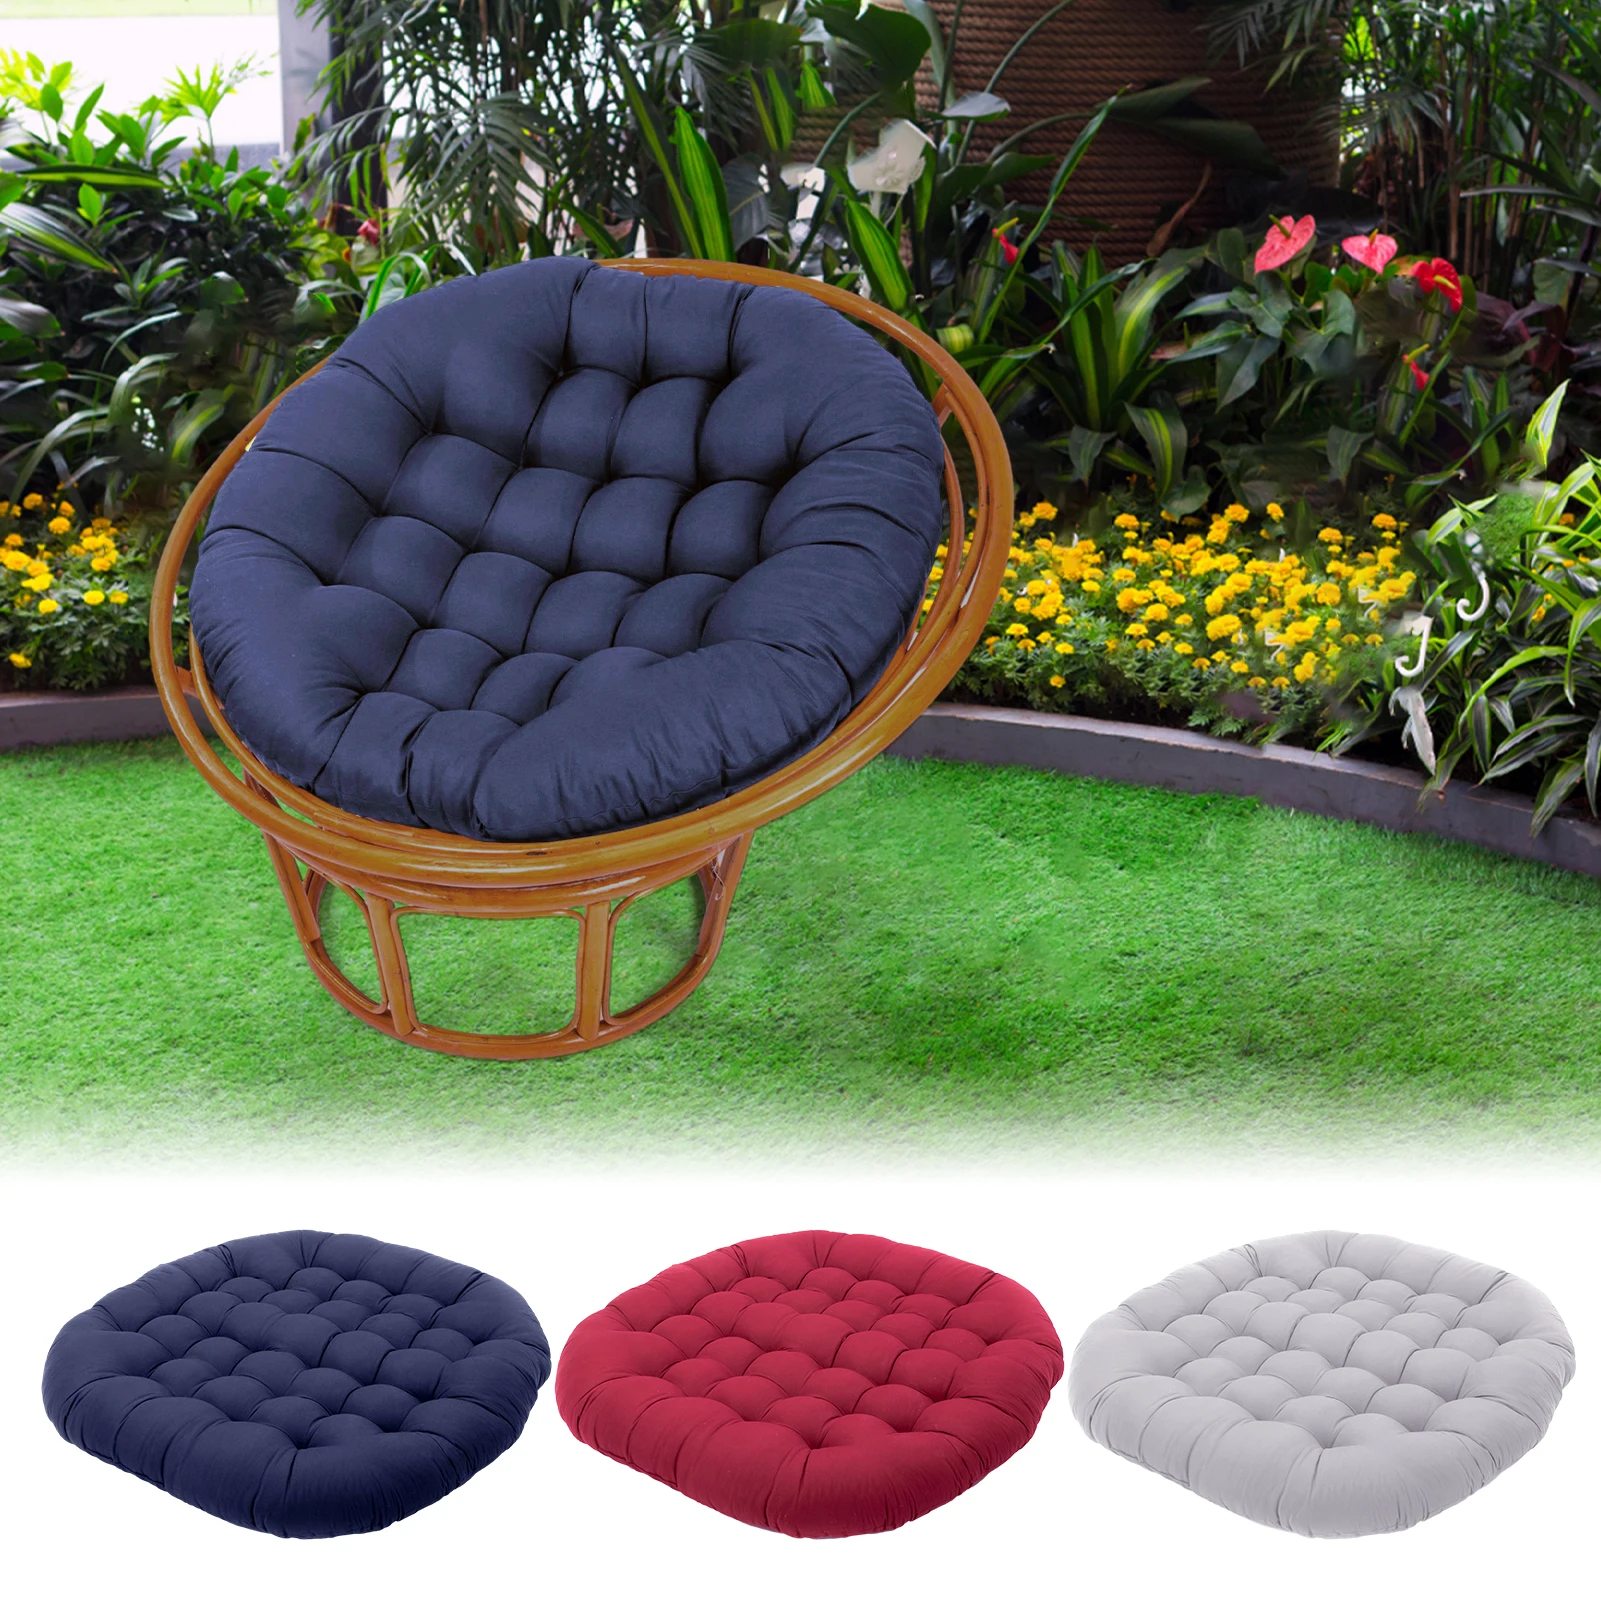 100cm Hammock Chair Cushions Soft Pad Cushion Hanging Chair Swing Seat Hanging Basket Seat Pad Thicken Swing Egg Chair Cushion images - 6